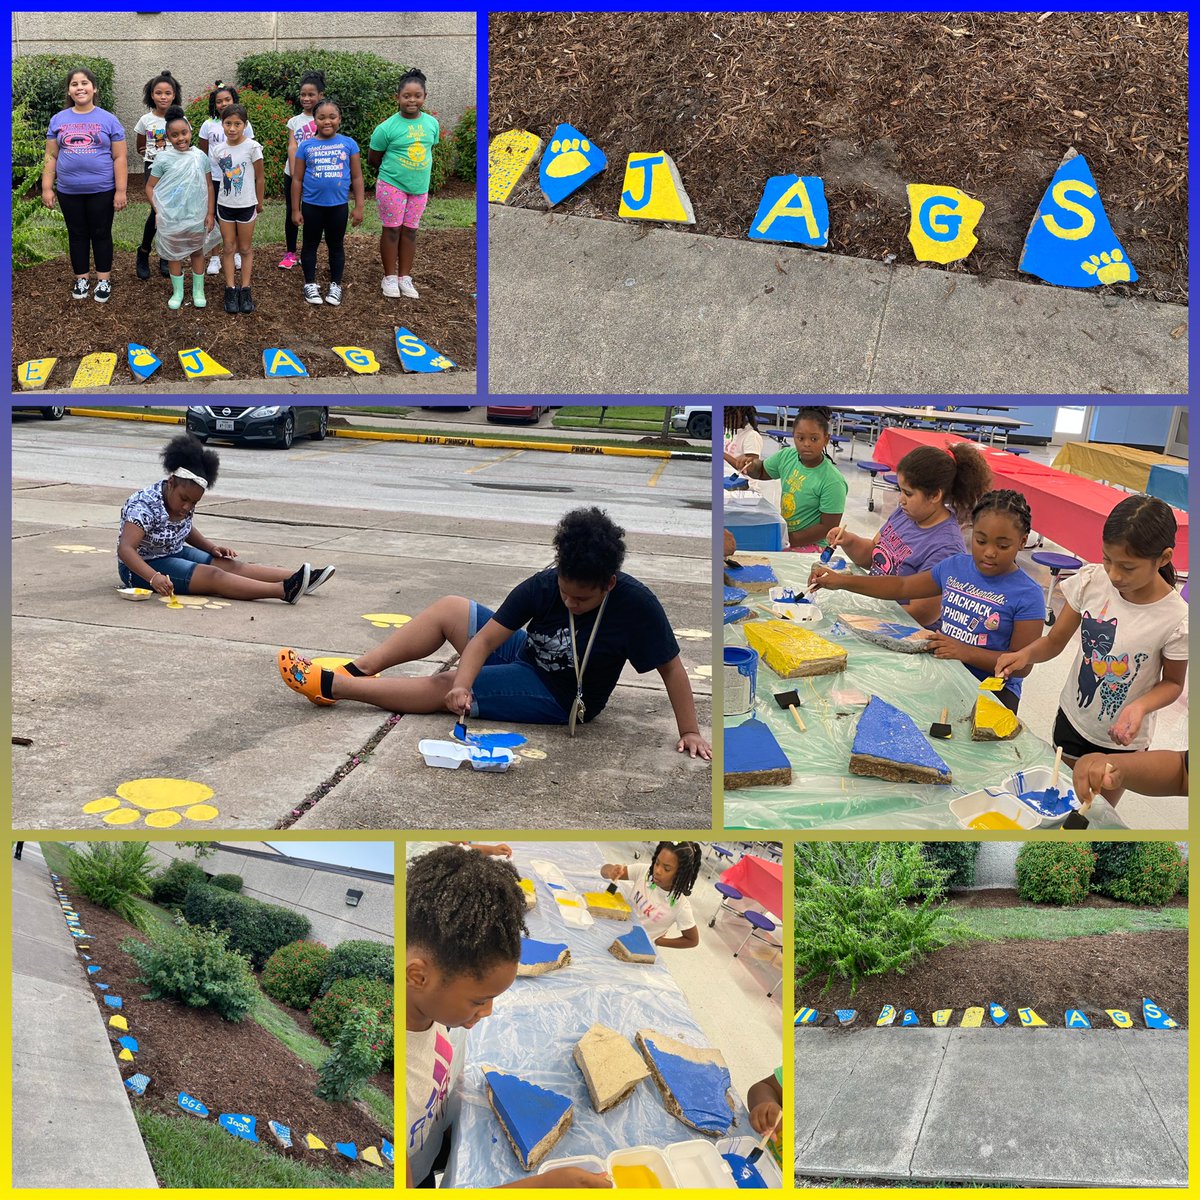 Our Jags Cheer team helping out with the beautification project at BGE. Way to go ladies. 💙💛 @BGE_Jaguars @MichelleColter2 @RhondaMason14 @FortBendISD #bgeistheplacetobe